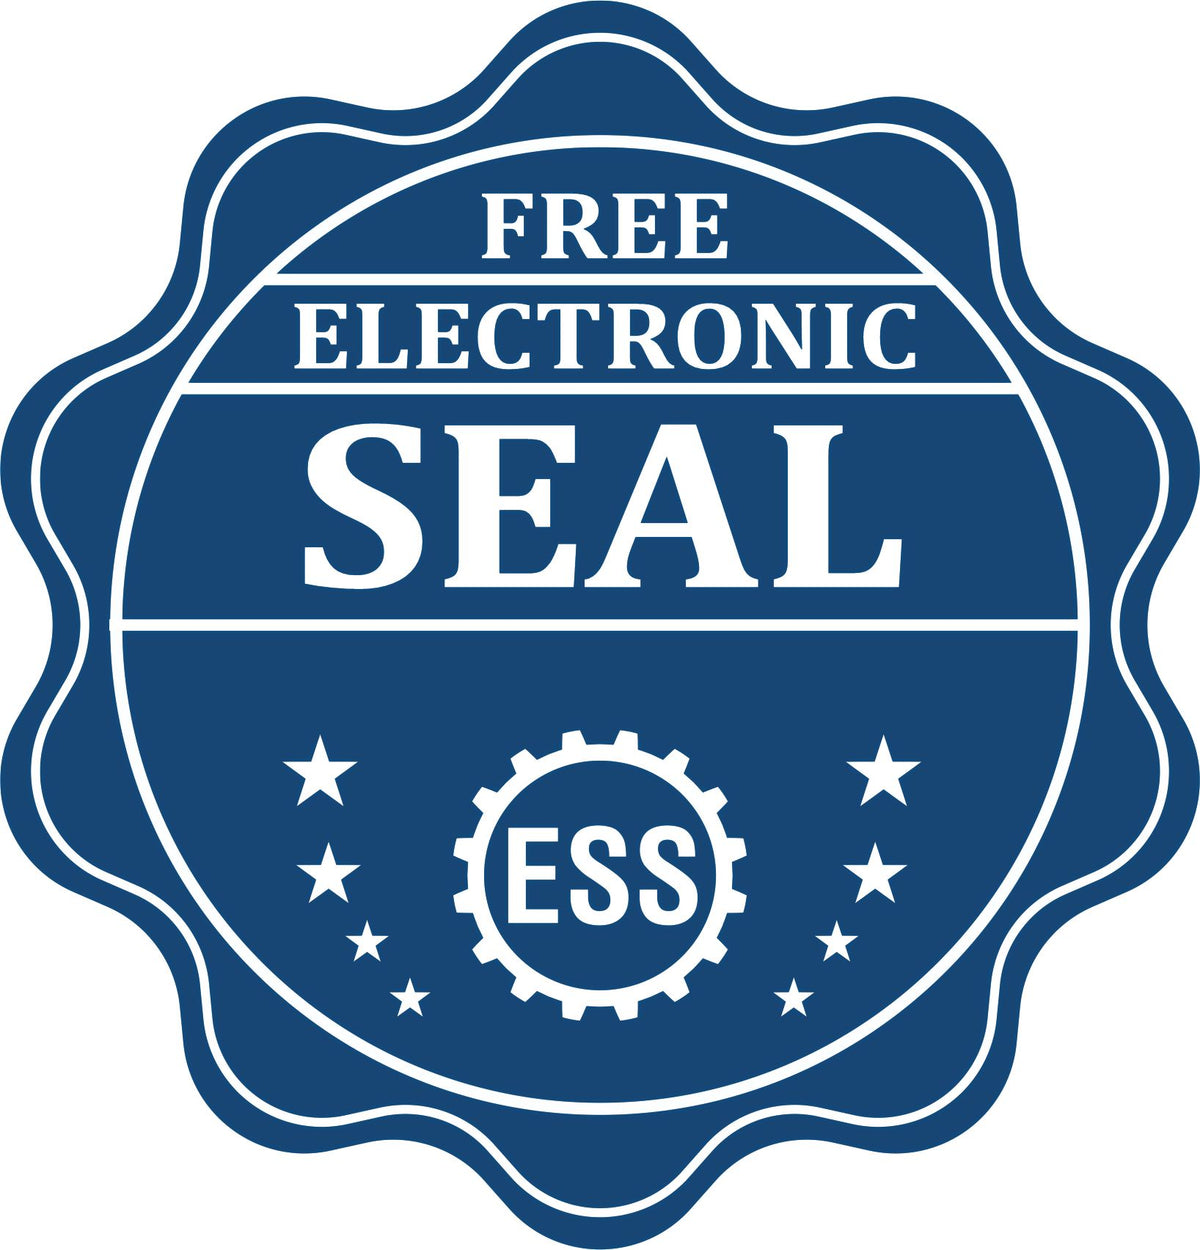 A badge showing a free electronic seal for the Gift Indiana Geologist Seal with stars and the ESS gear on the emblem.